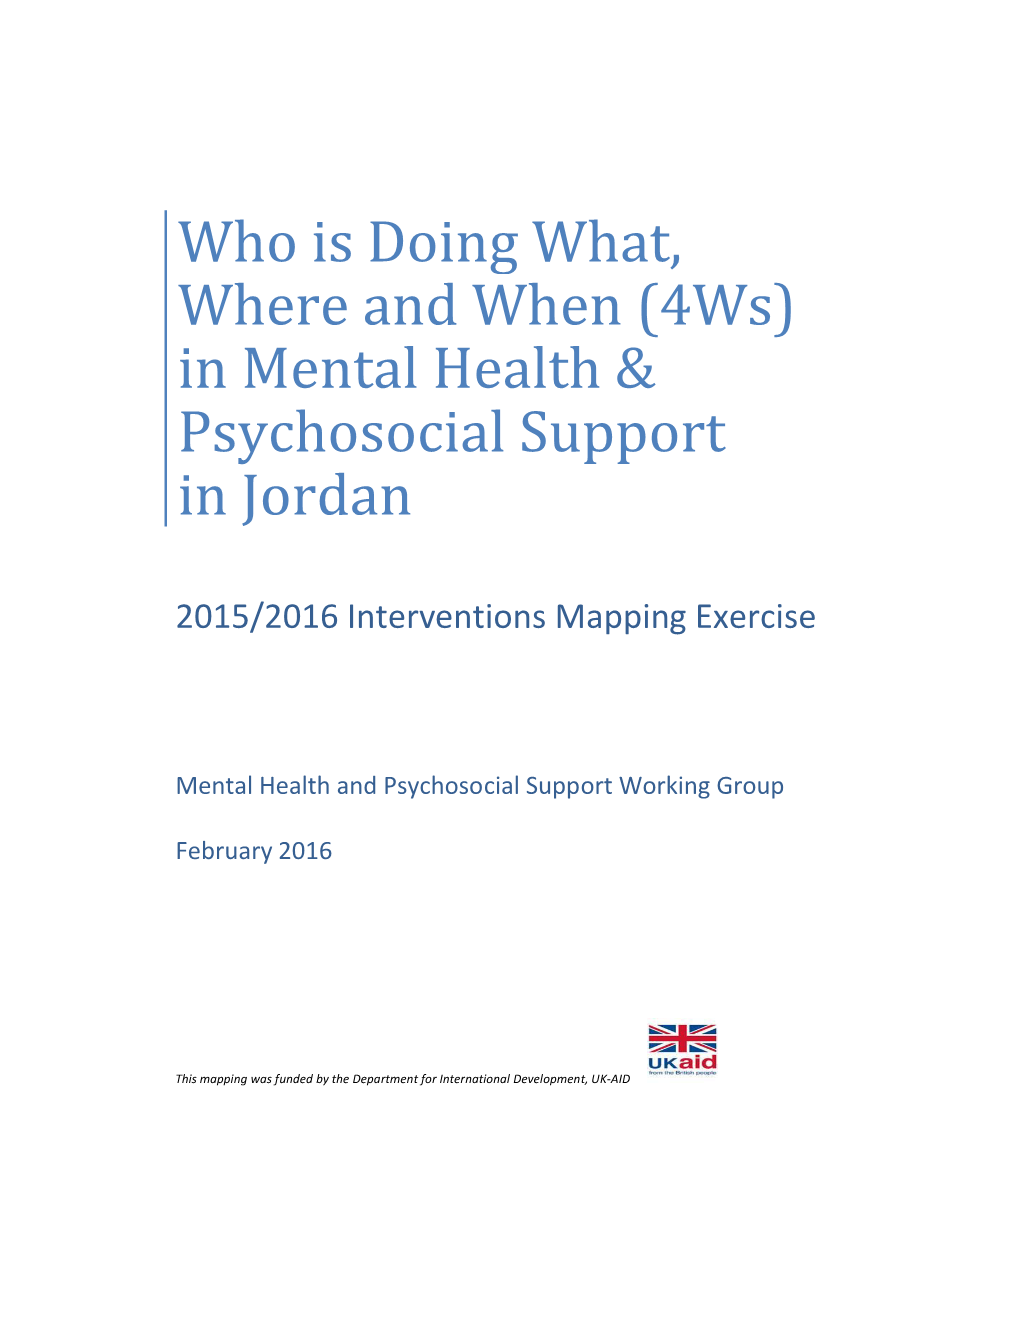 Who Is Where, When, Doing What (4Ws) in Mental Health